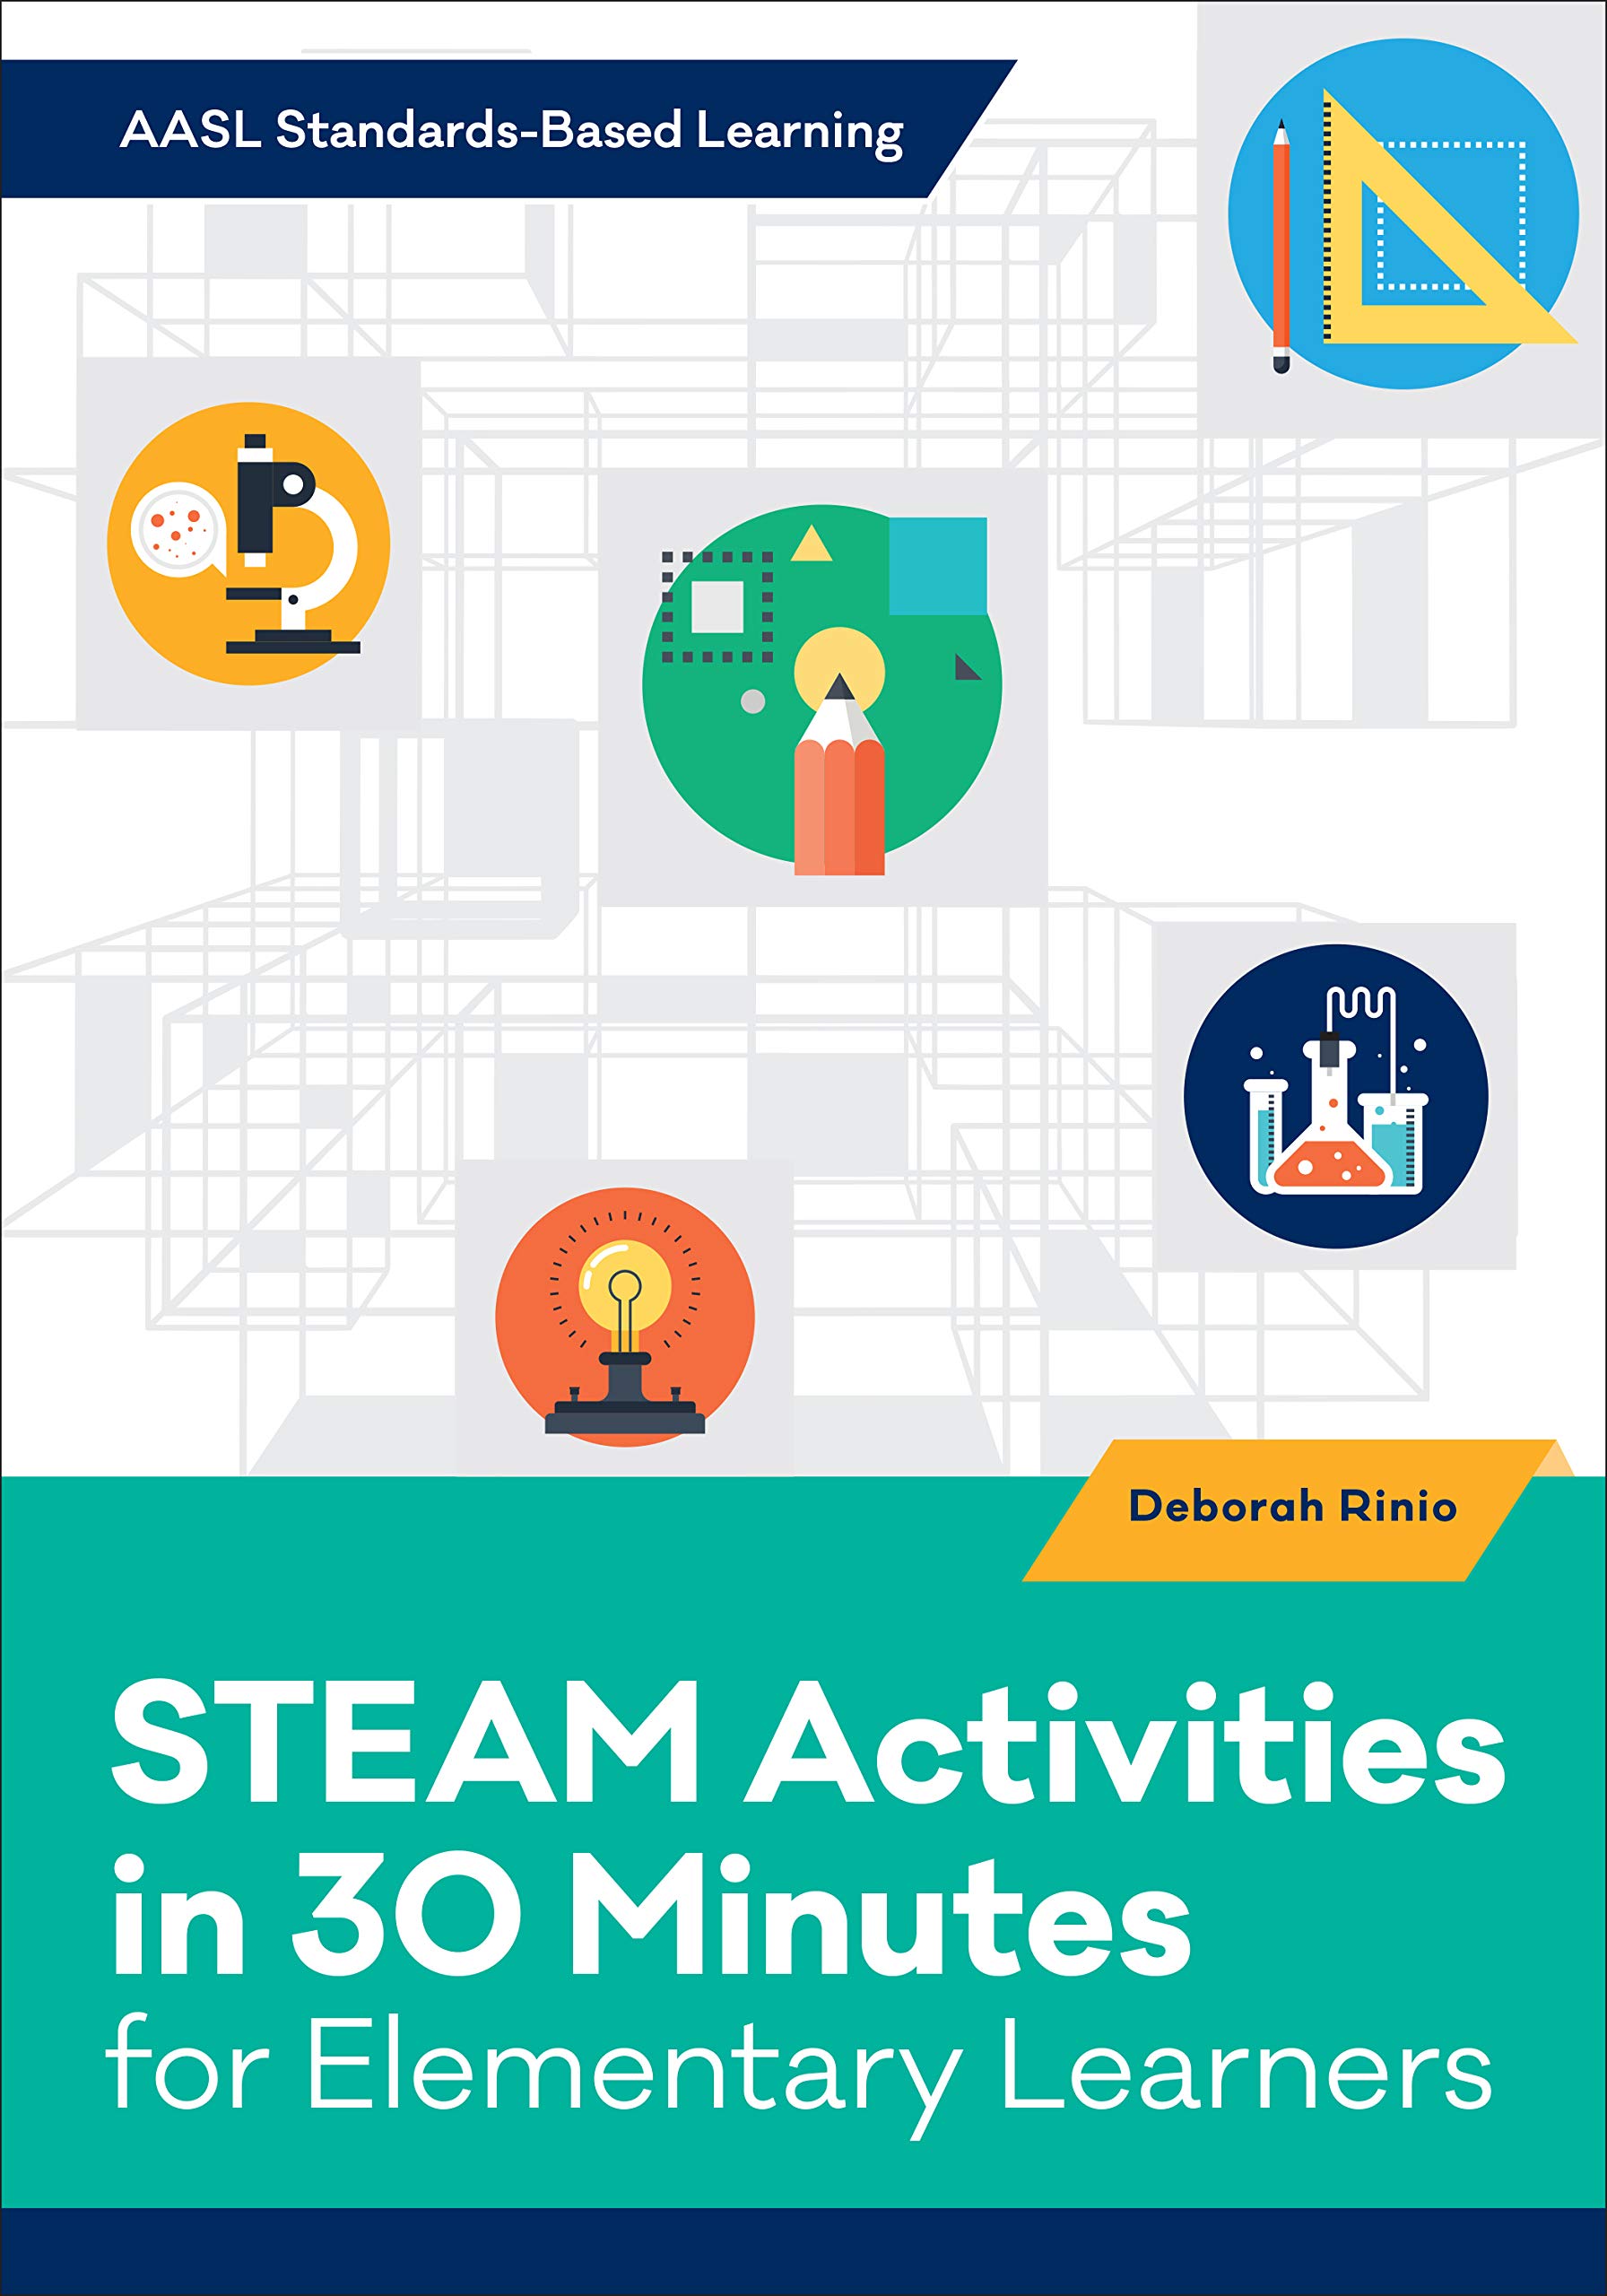 STEAM Activities in 30 ­Minutes for Elementary Learners